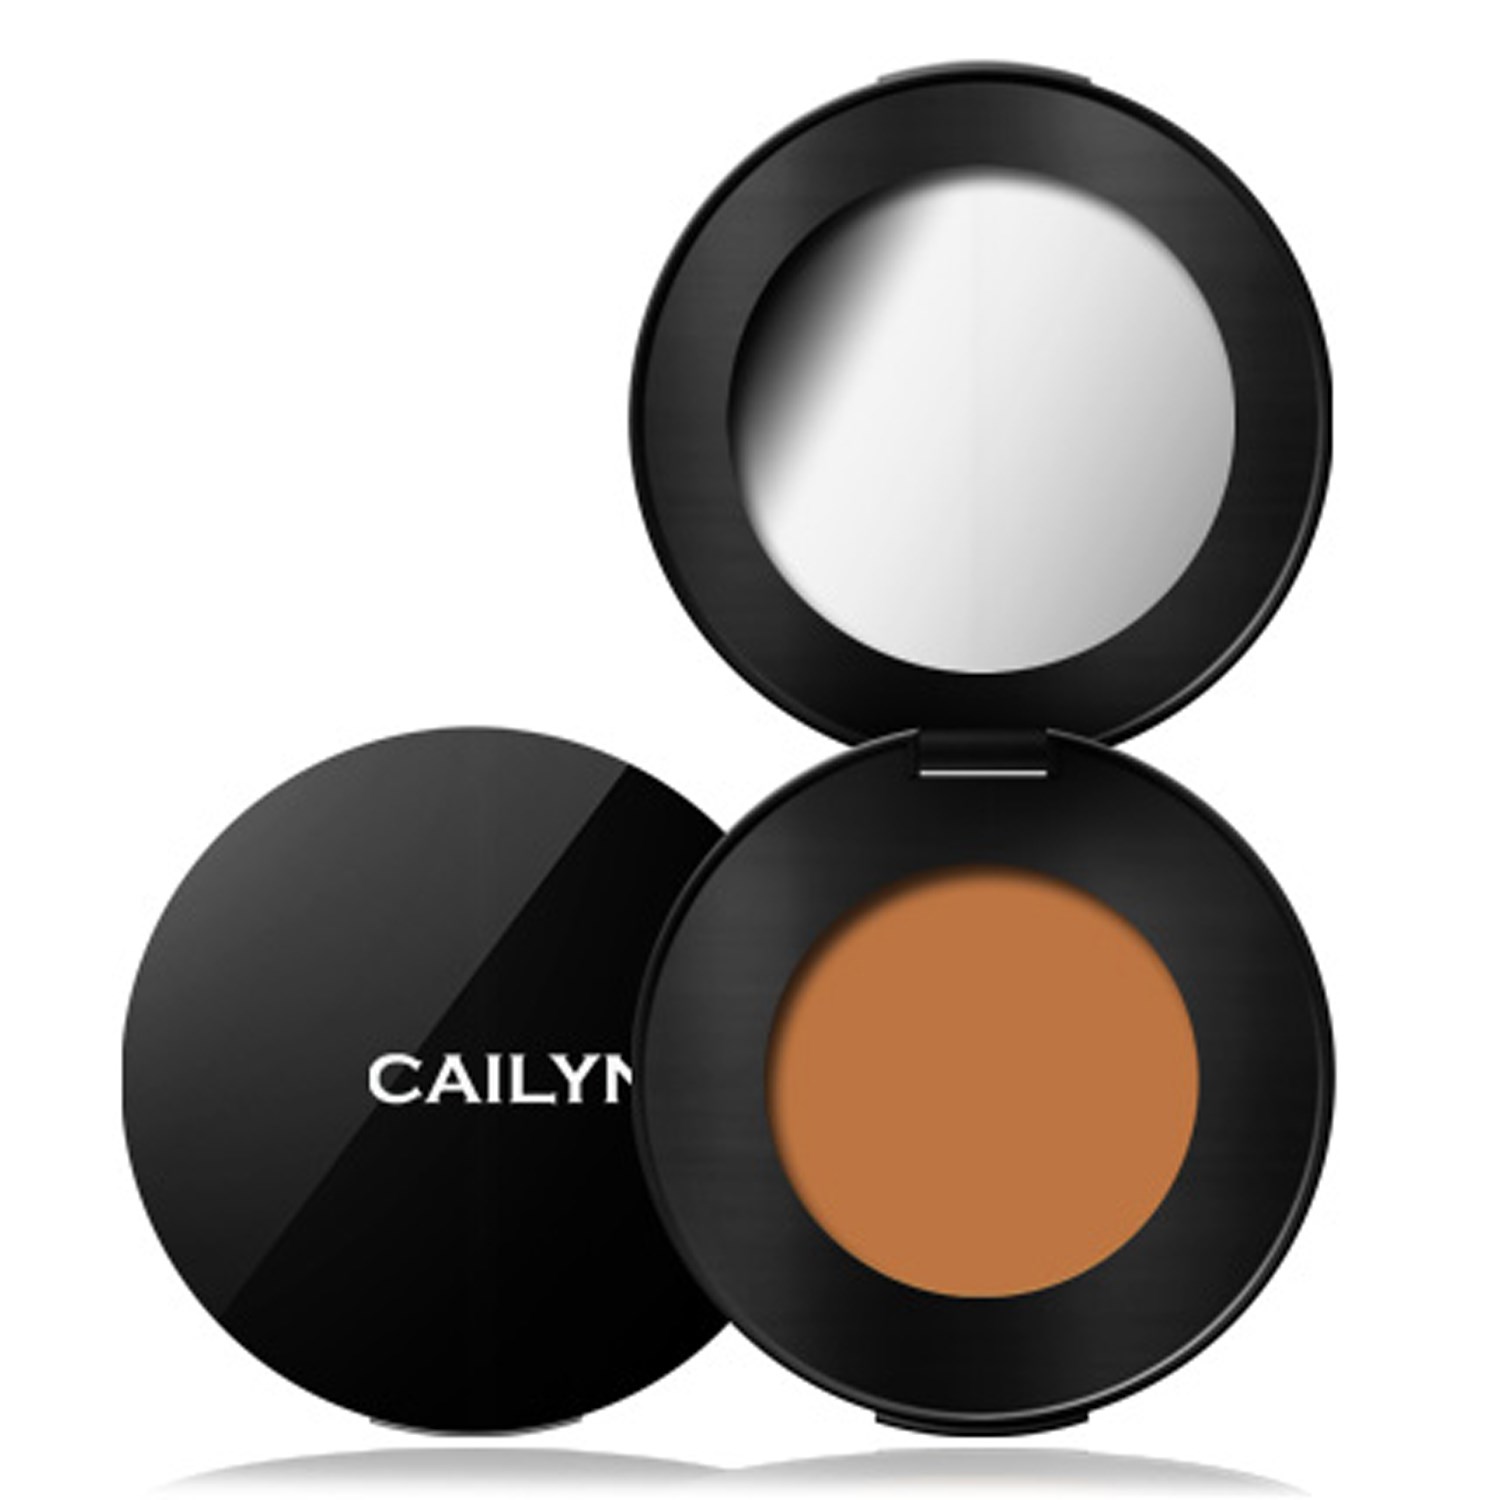 Cailyn Cosmetics Hd Coverage Concealer Merino (0812772019216)